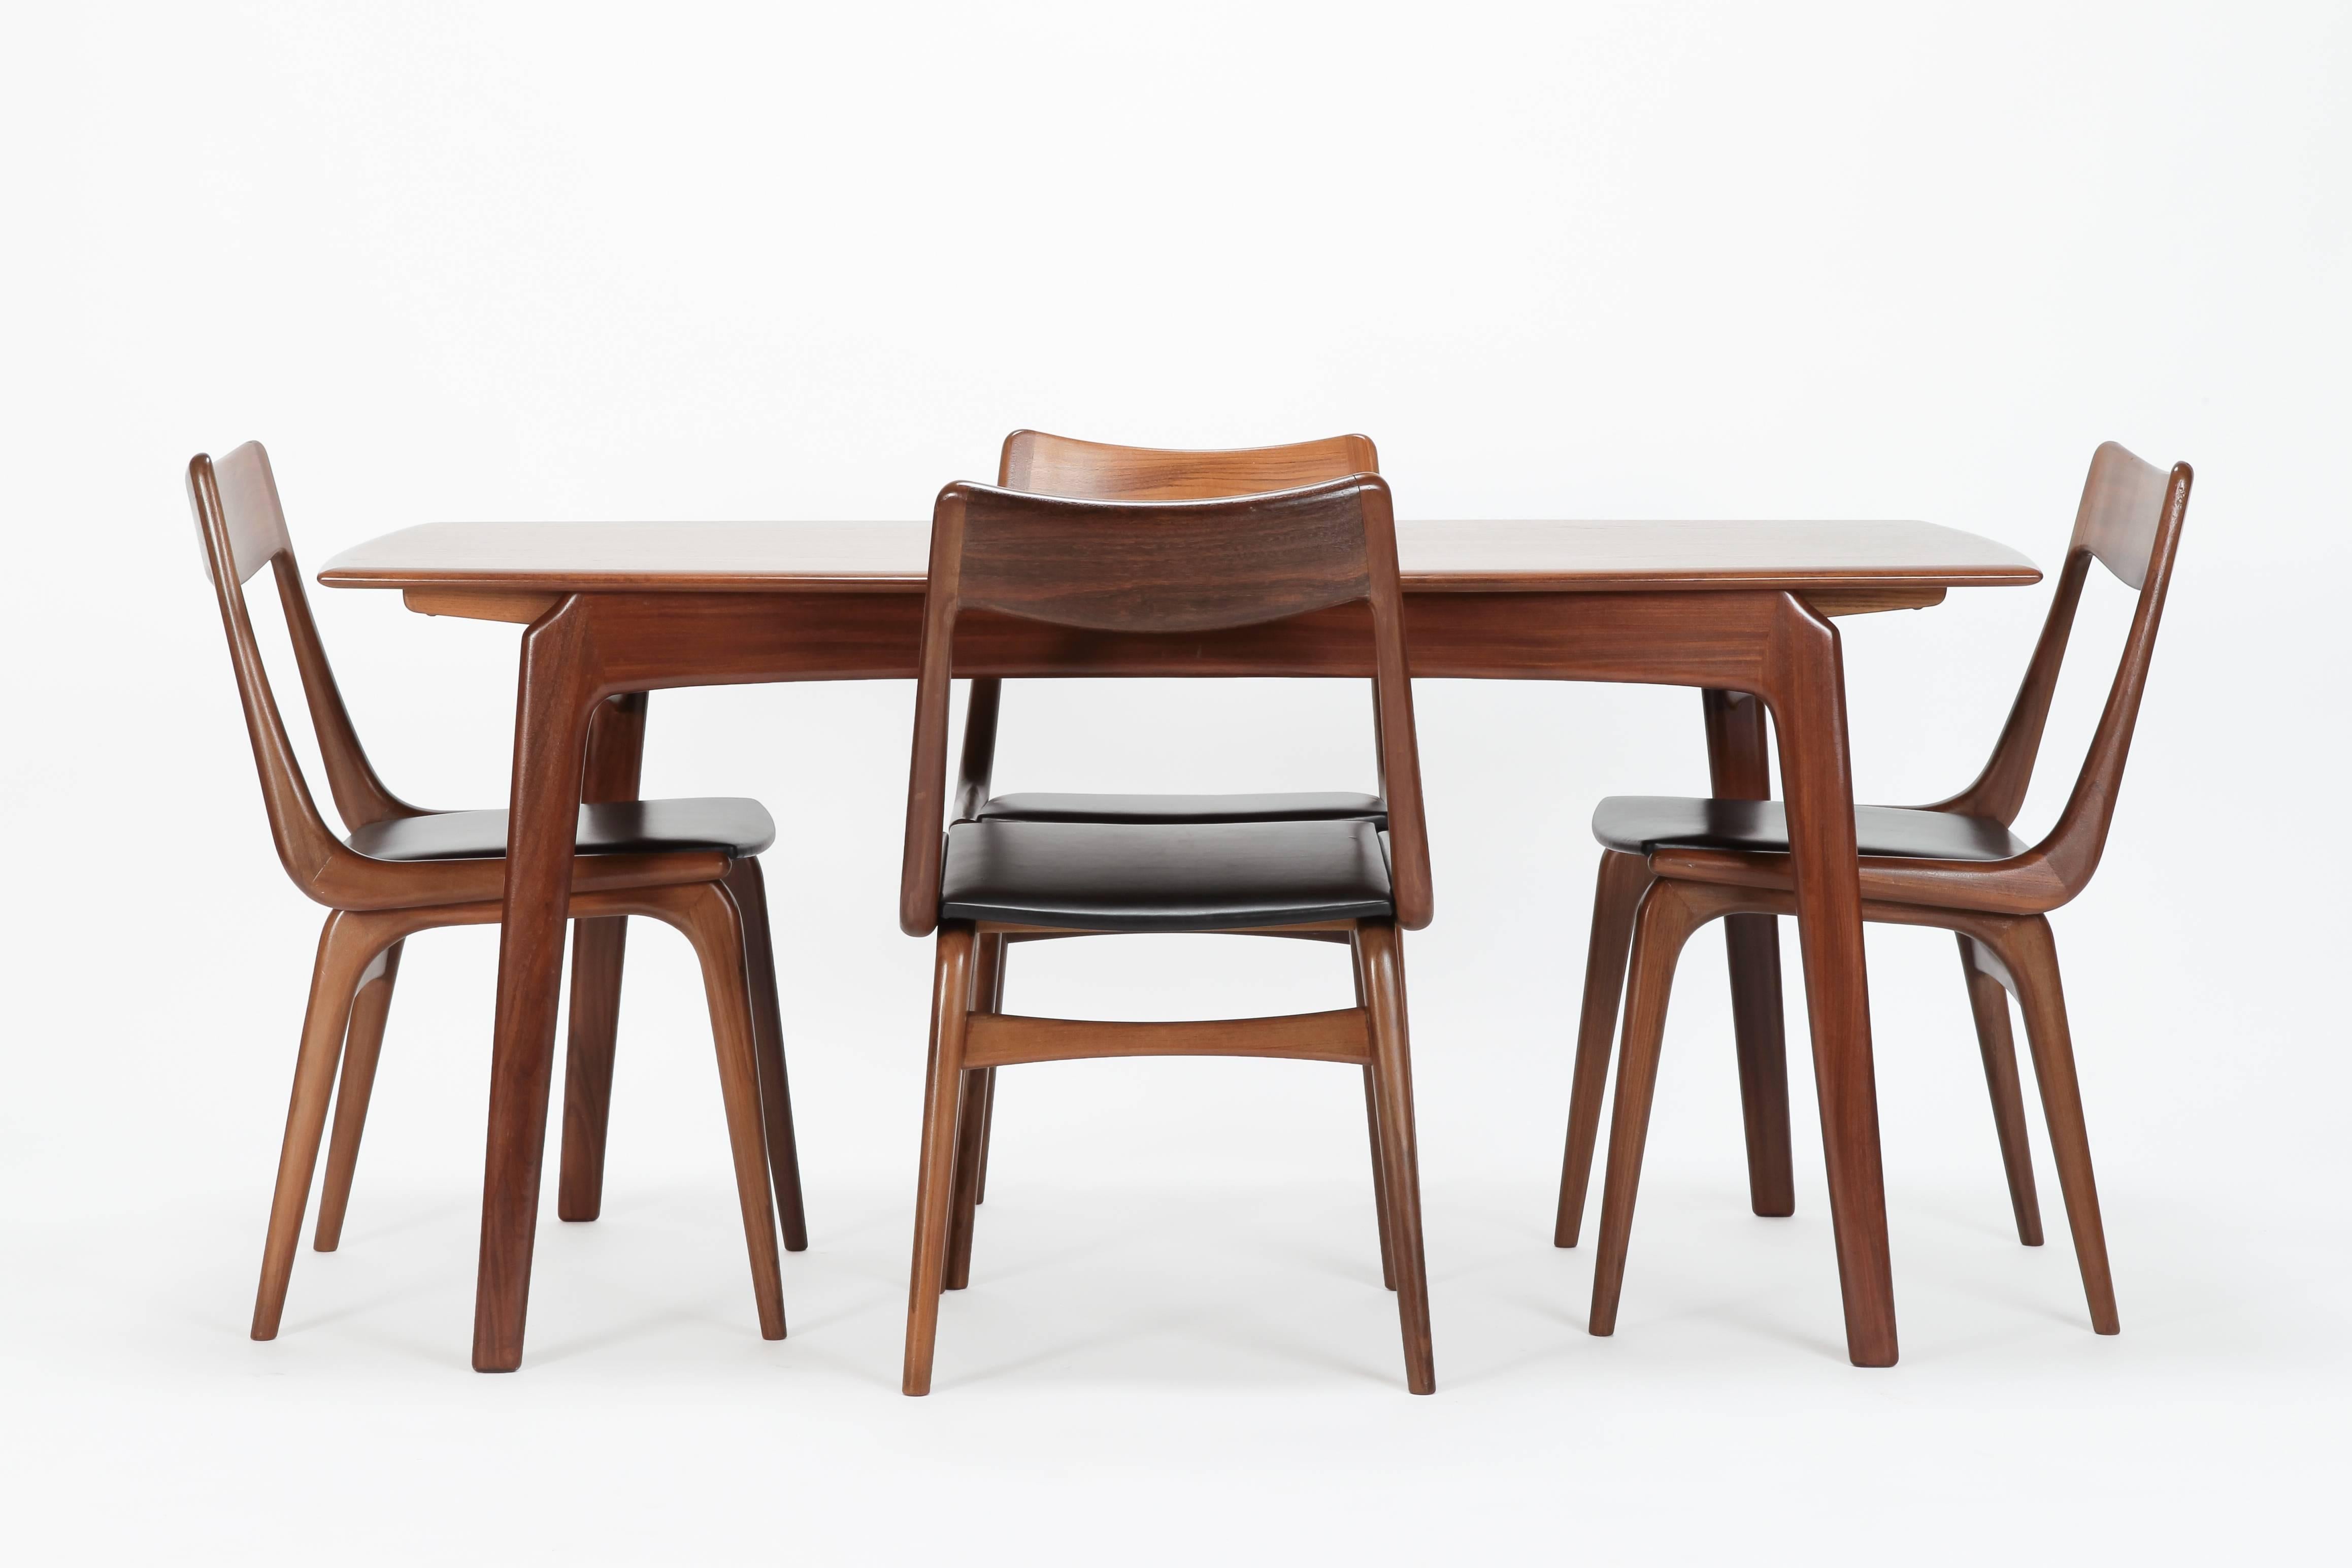 Erik Christensen dining table set manufactured in Denmark by Slagelse Mobelvaerk in the 1950’s. This table has one of the simplest and most elegant leaf storage designs. Hence to the legs of the table and the chair backrests, these popular design